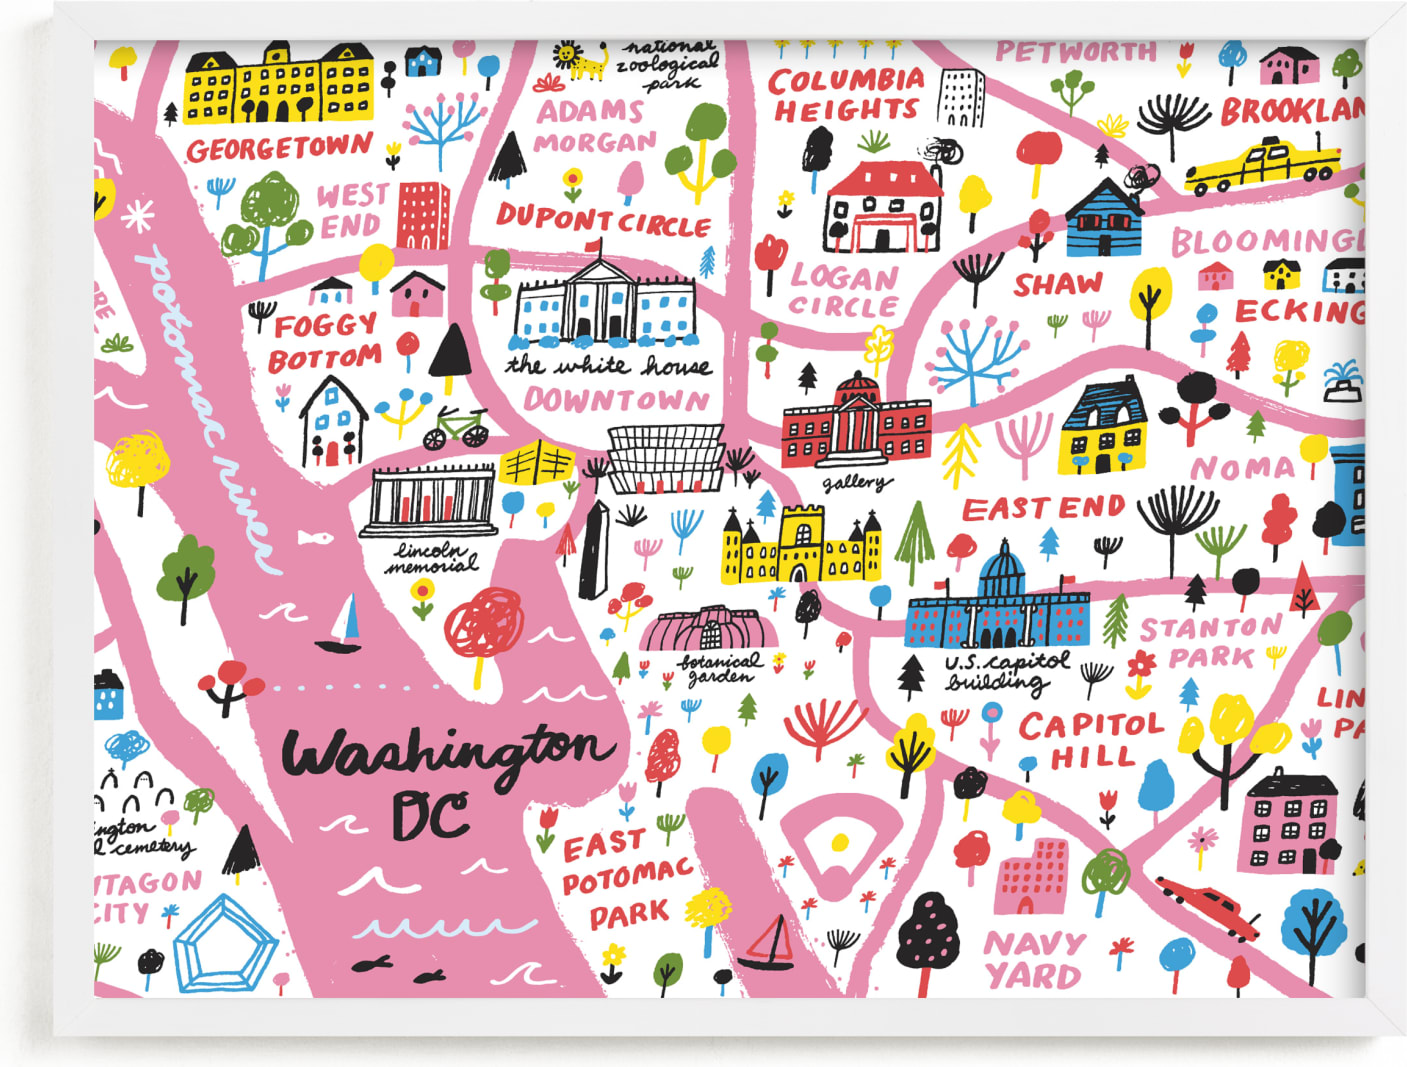 This is a colorful art by Jordan Sondler called I Love Washington D.C..